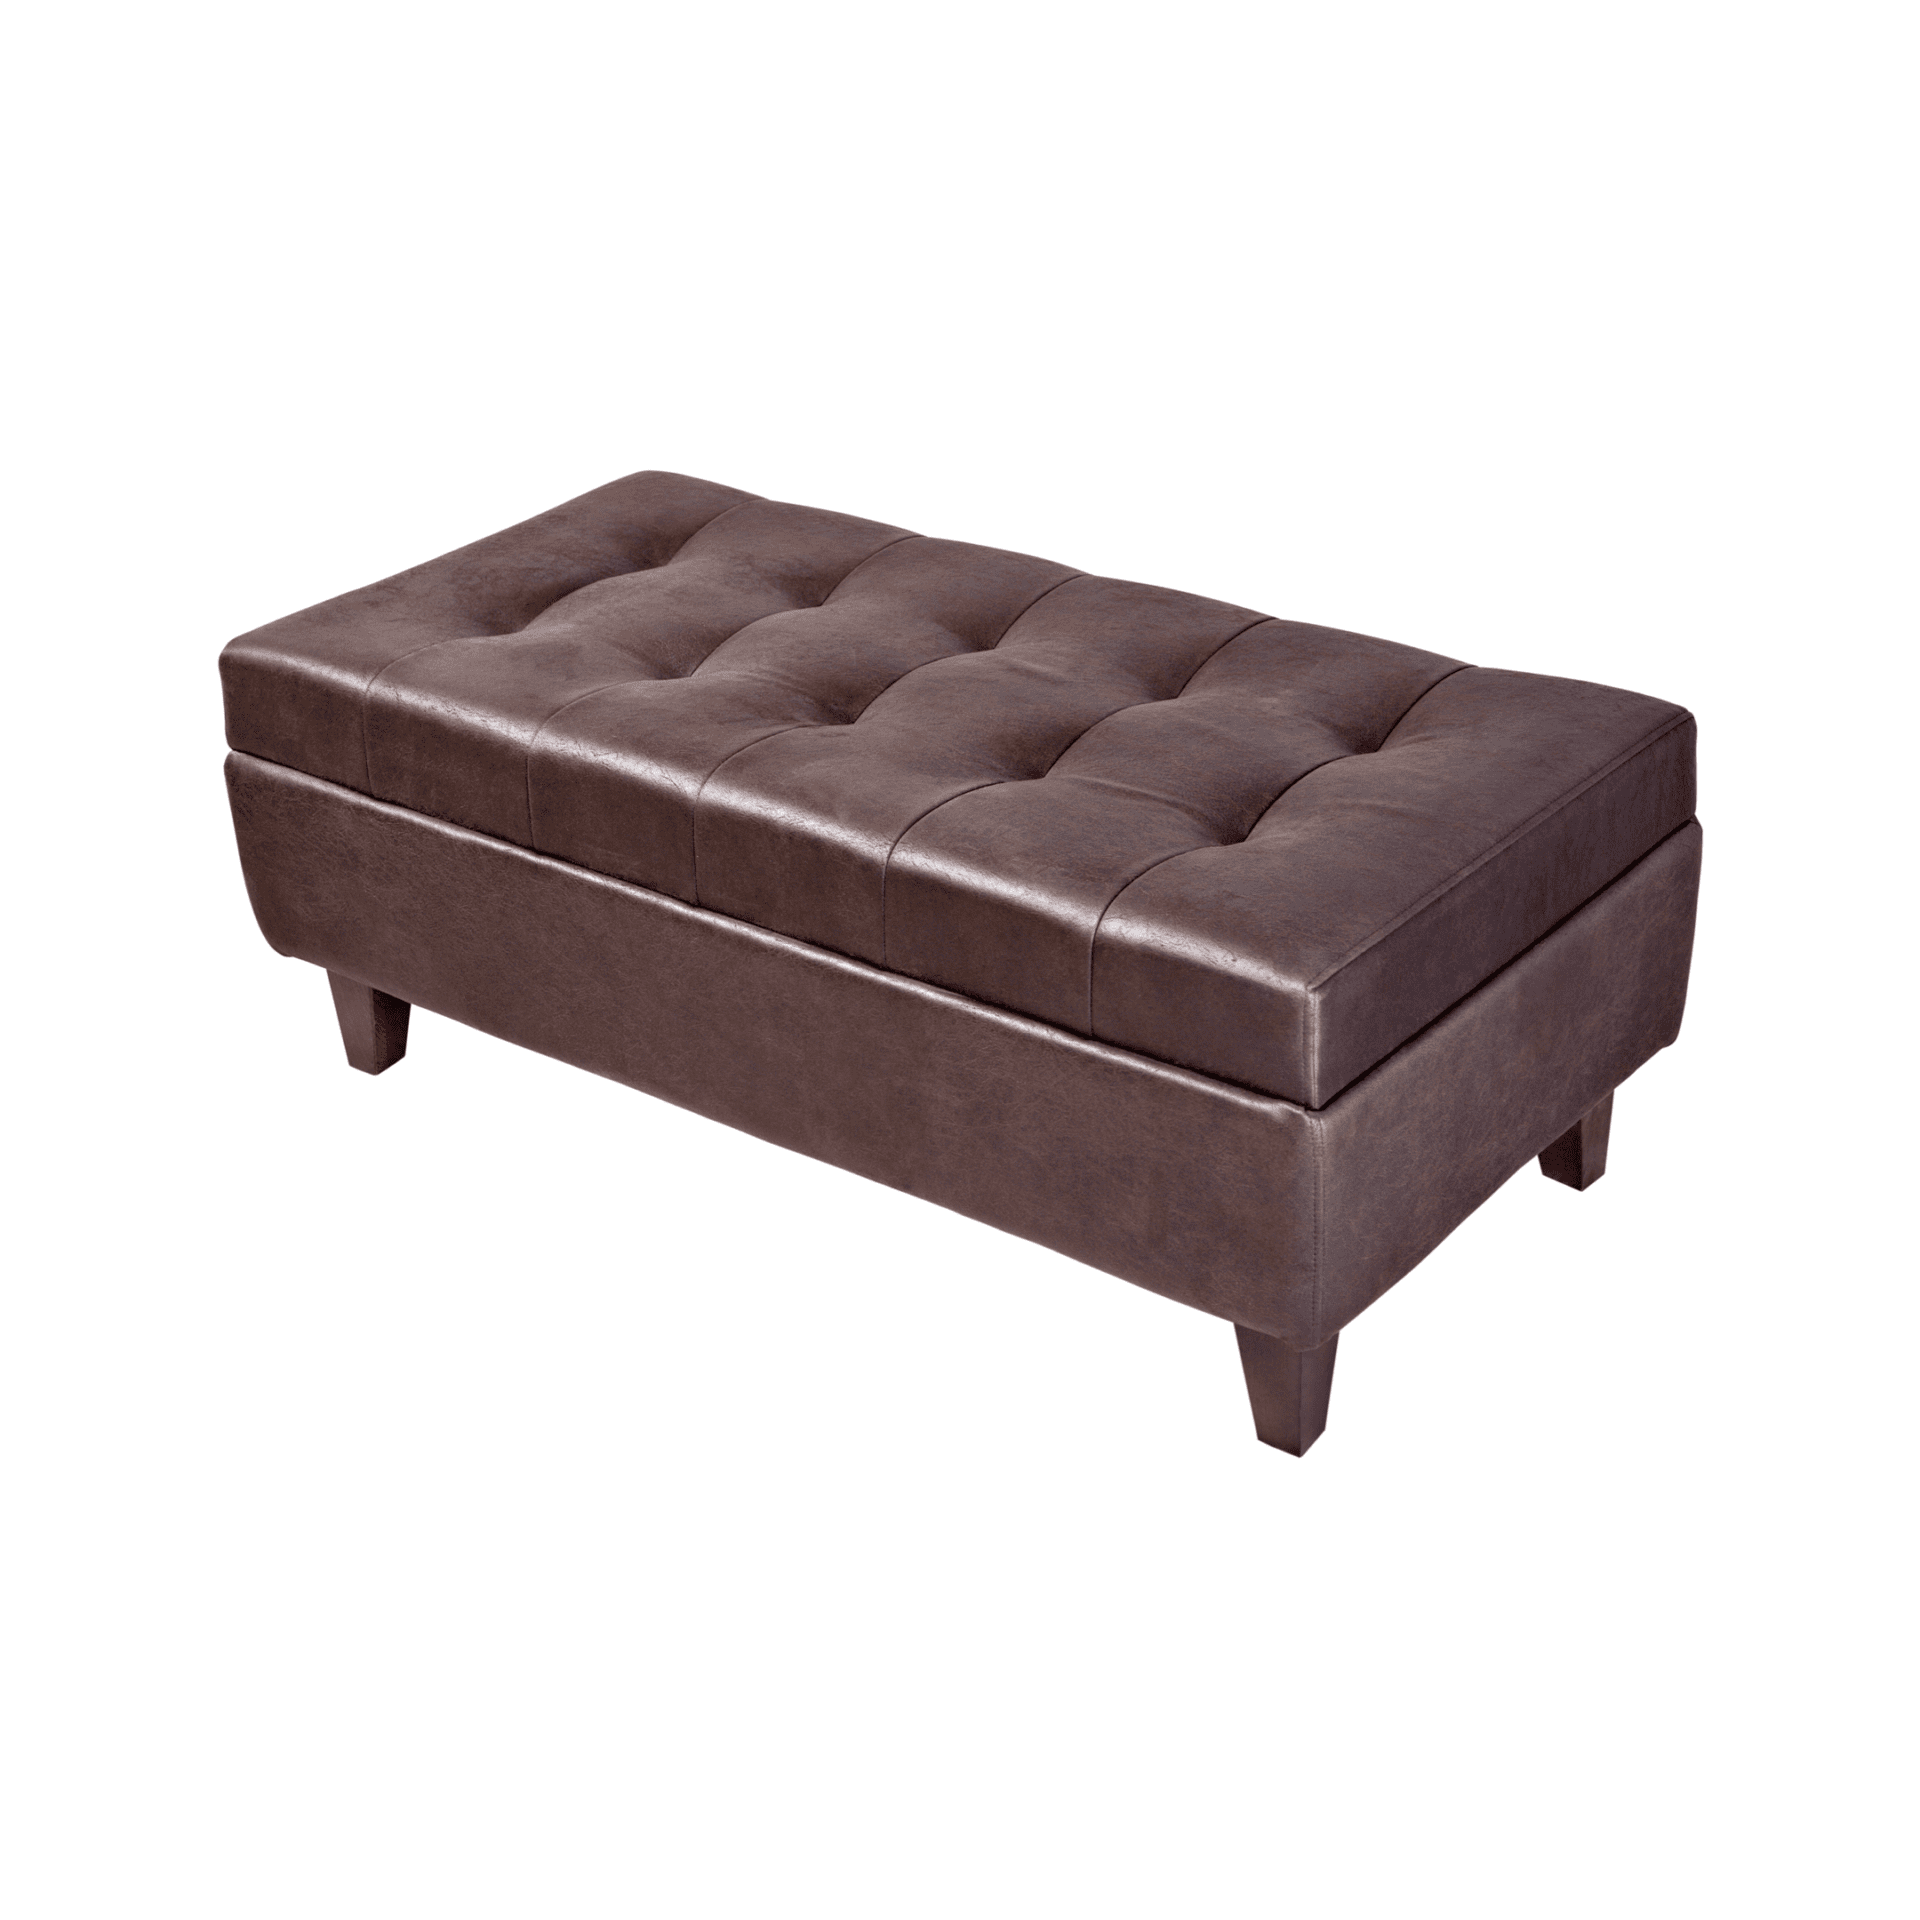 Fergus - custom bedroom furniture - Upholstered Ottomans and Chairs - Blend Home Furnishings